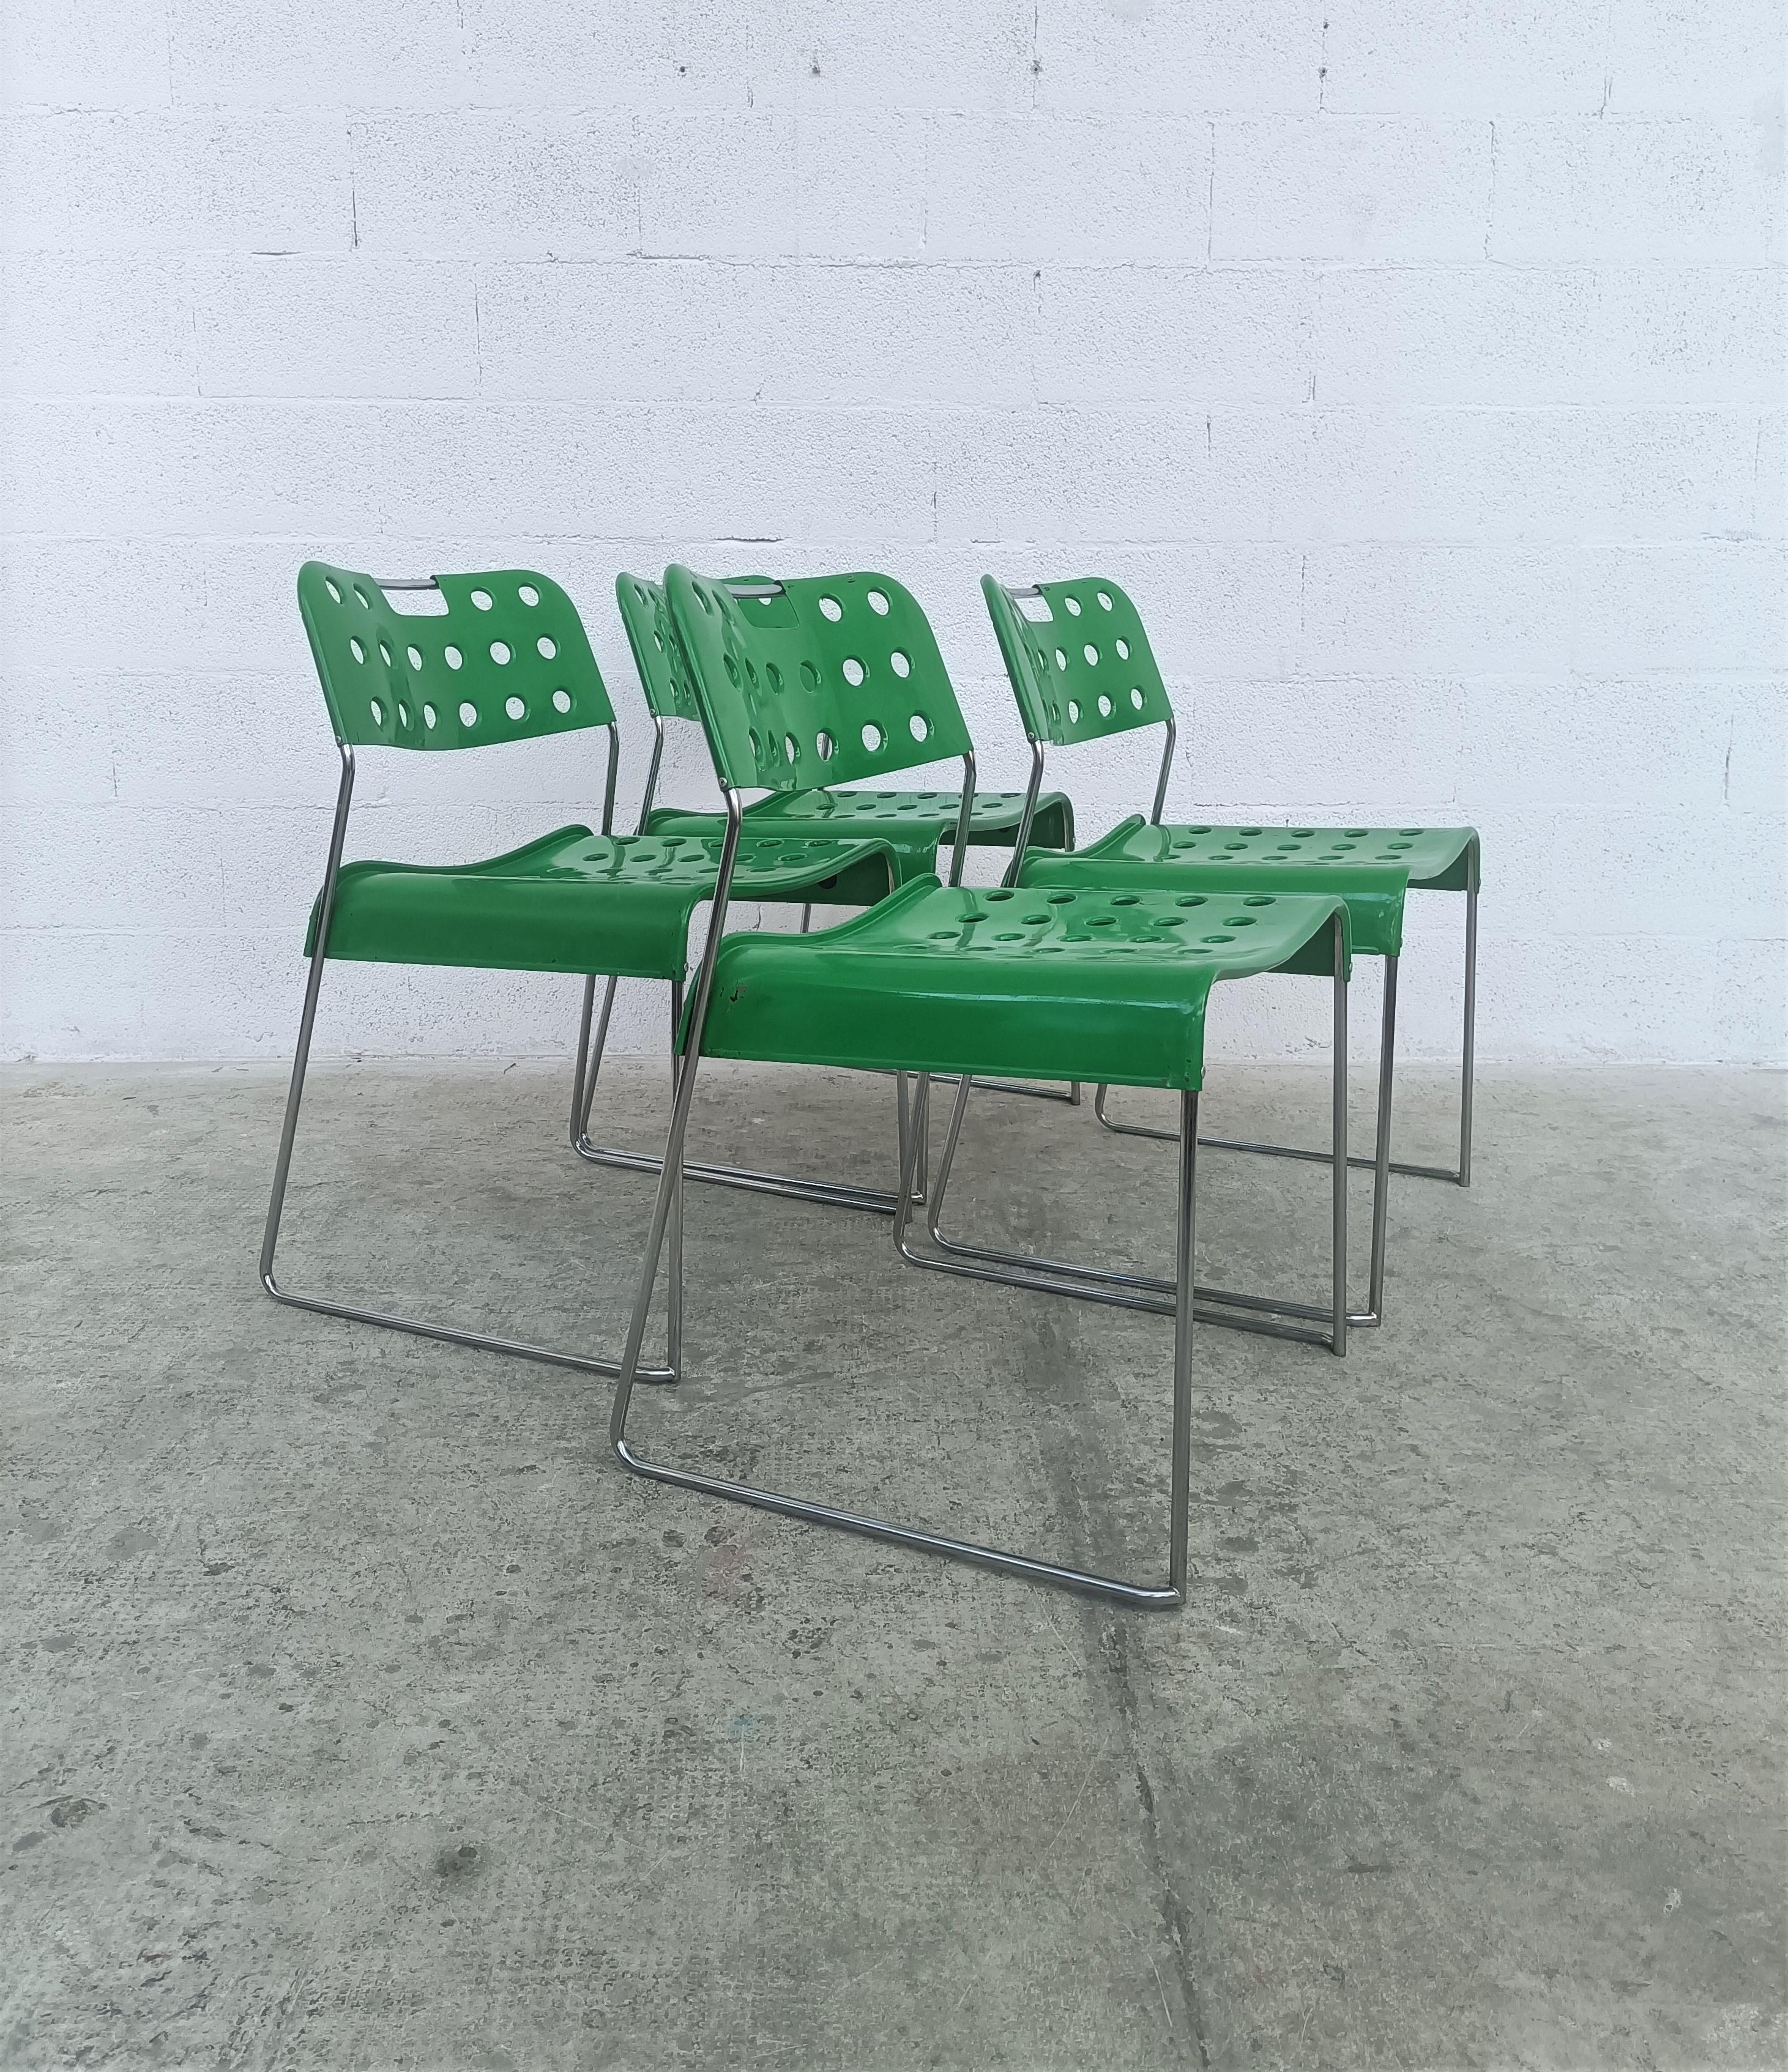 4 Metal dining chairs model Omkstak designed by Rodney Kinsman and produced by Bieffeplast 1970s.
Tubular steel chromed frame, seat and back rest of moulded sheet steel coated with yellow epoxy resin. The perforated details make the chair more